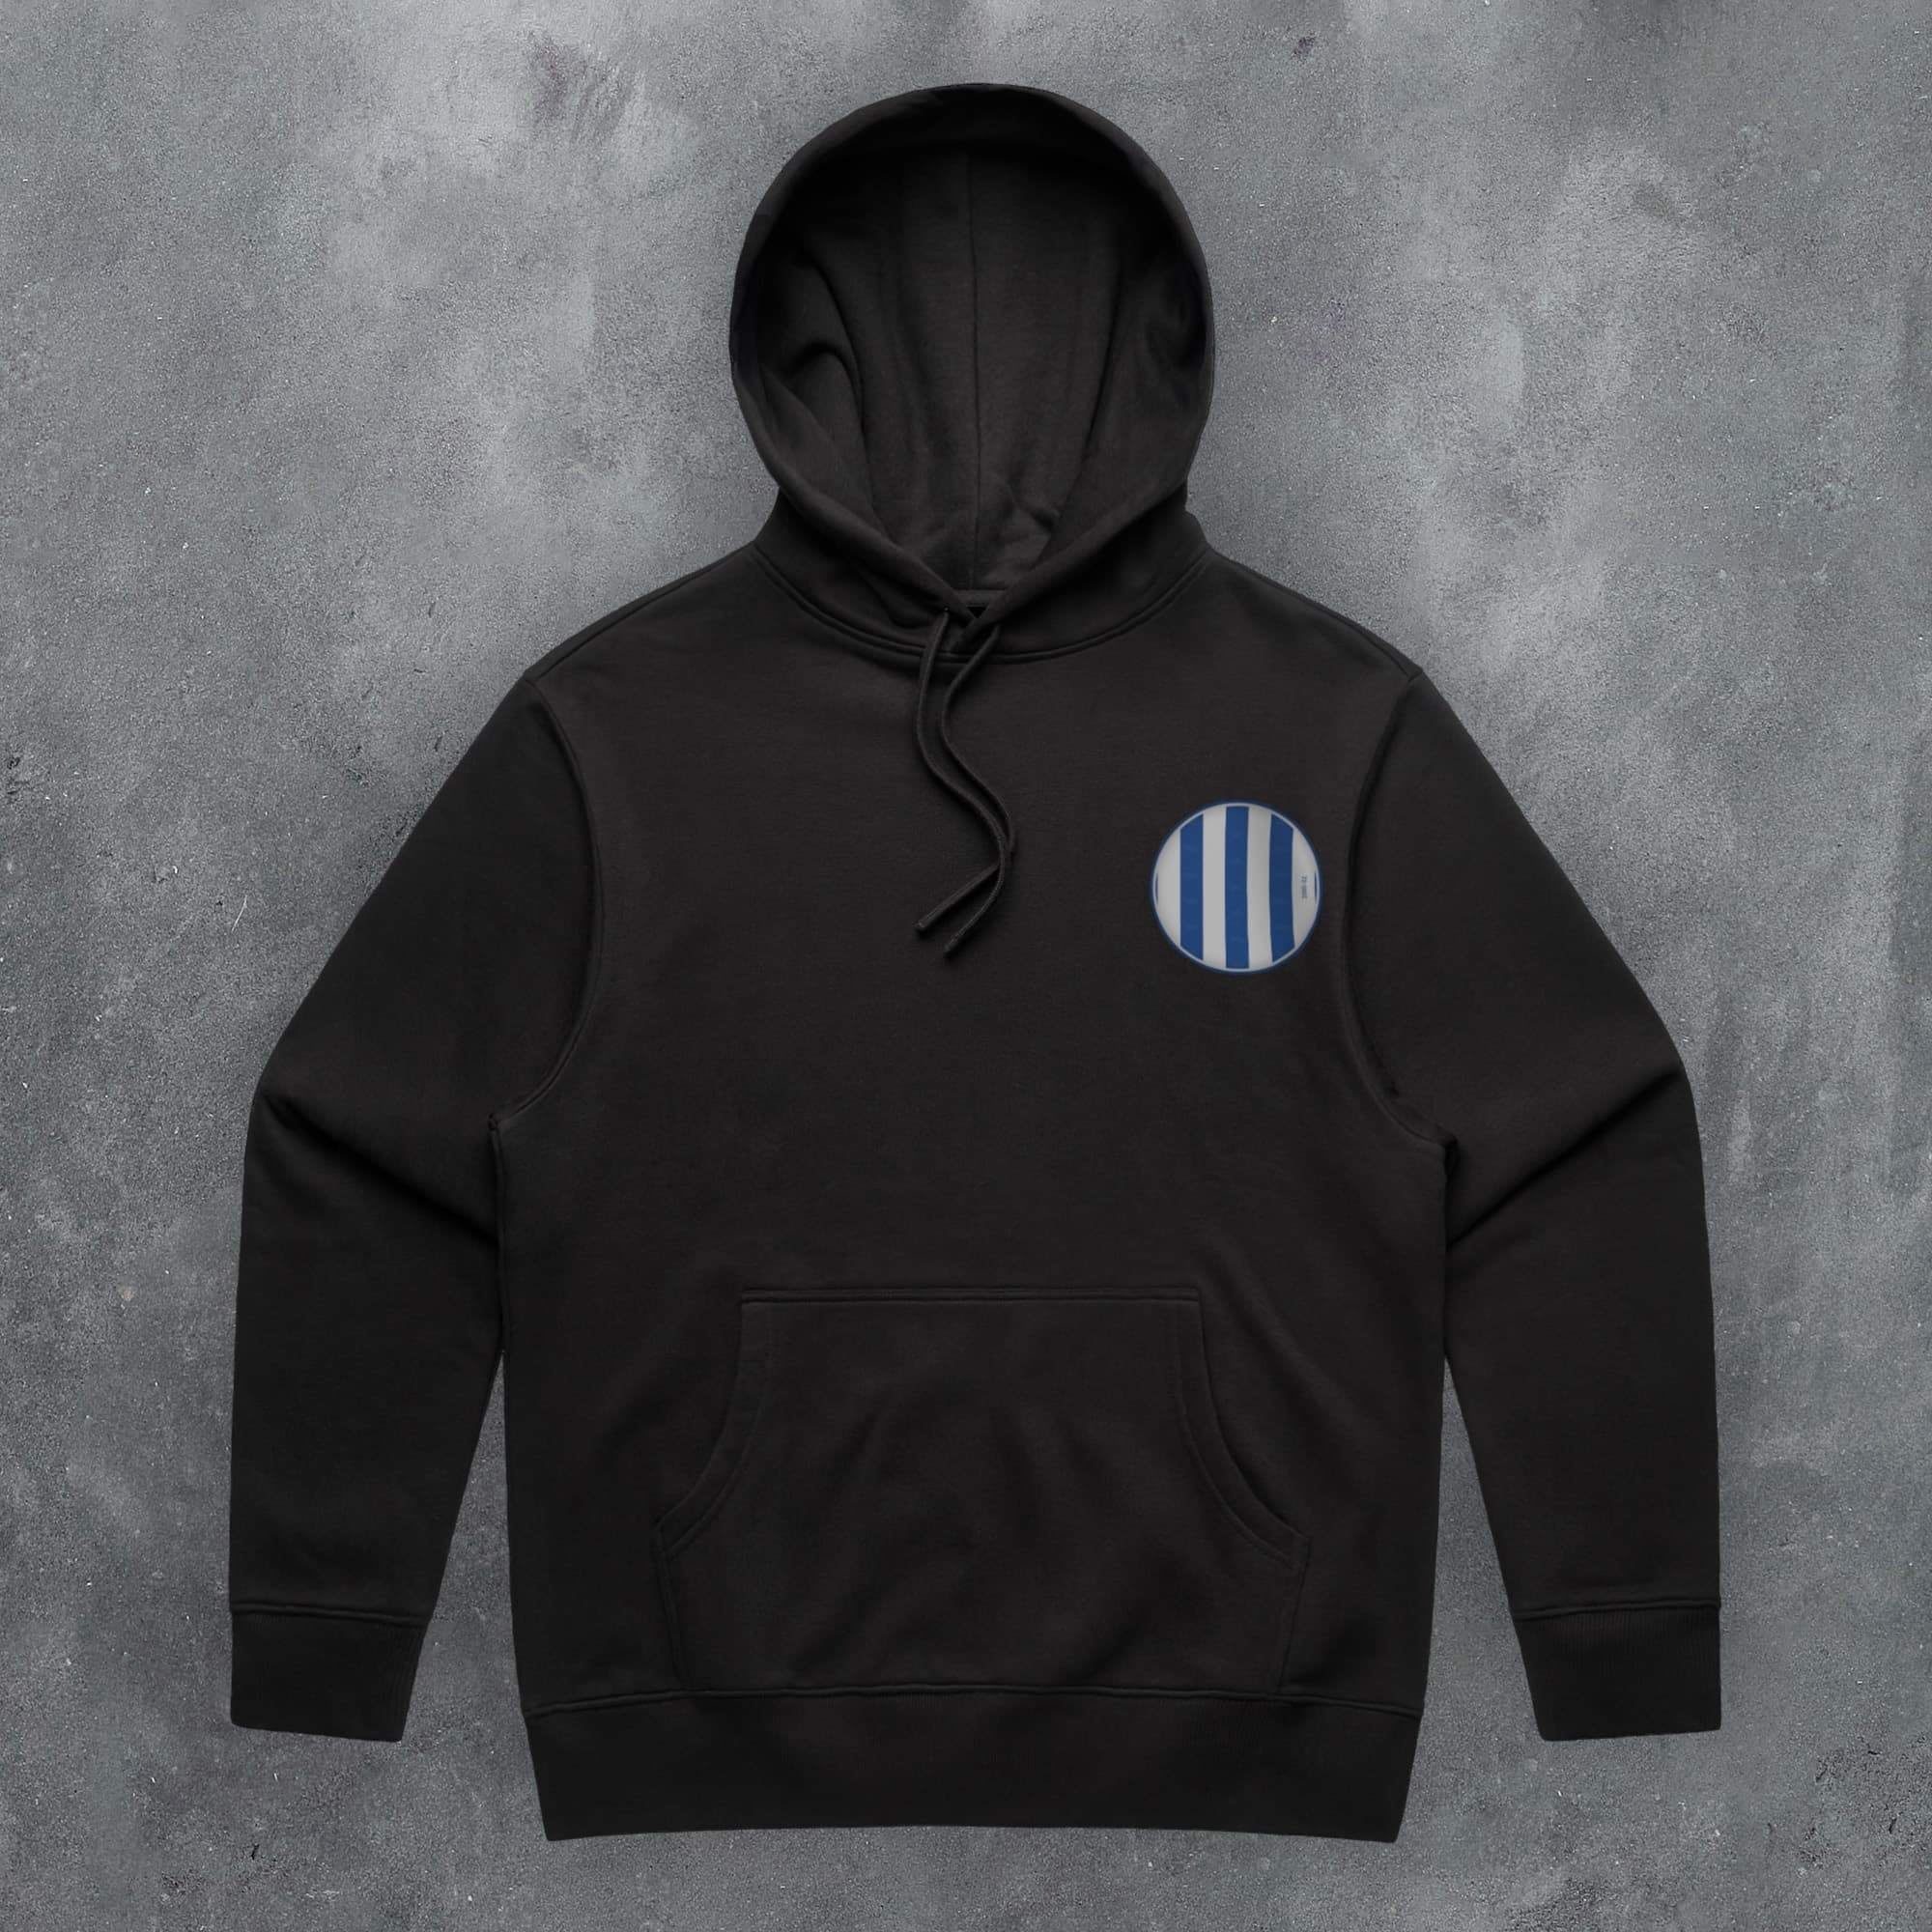 a black hoodie with a blue circle on the front